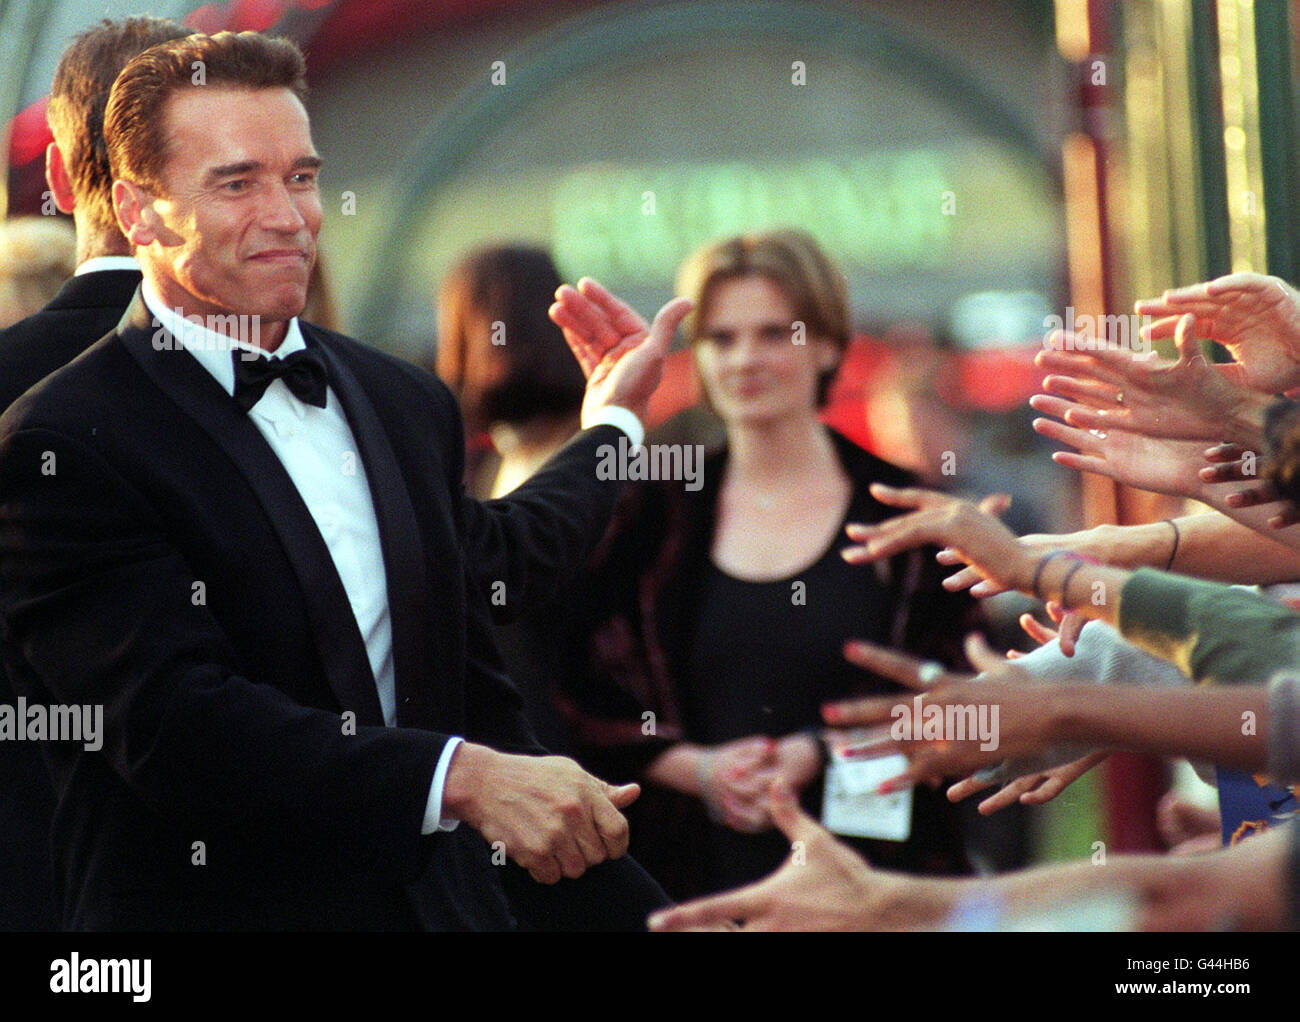 Fans reach out to shake hands with American actor Arnold Schwarzenegger in London for the UK premiere of his latest film 'Eraser' at the Warner Bros. Cinema this evening (Wednesday). Photo by Adam Butler/PA. Stock Photo